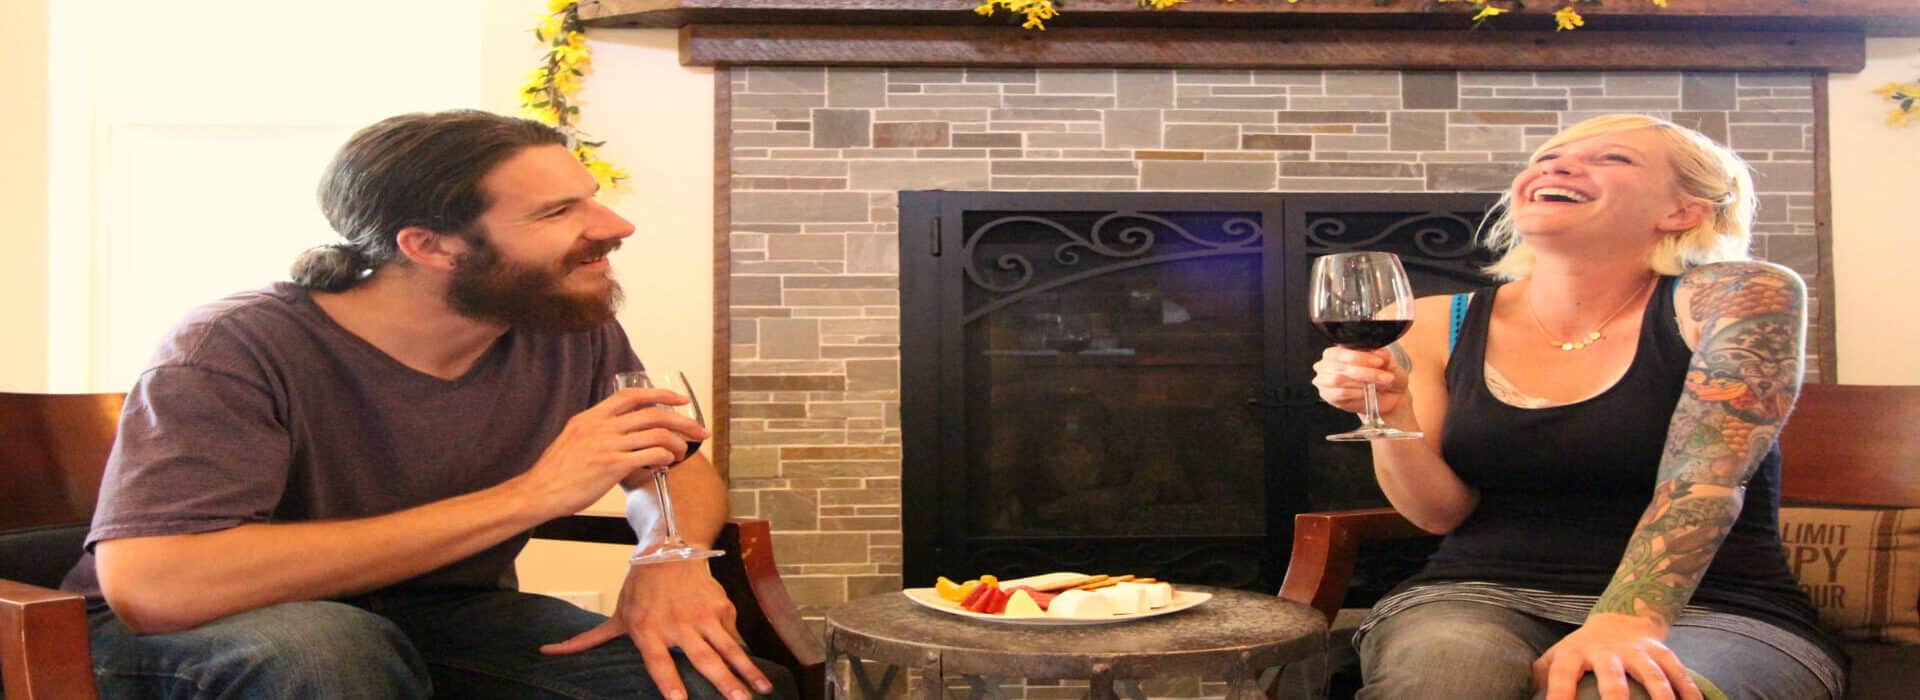 a man and a woman enjoying a glass of wine and conversation in front of a fireplace